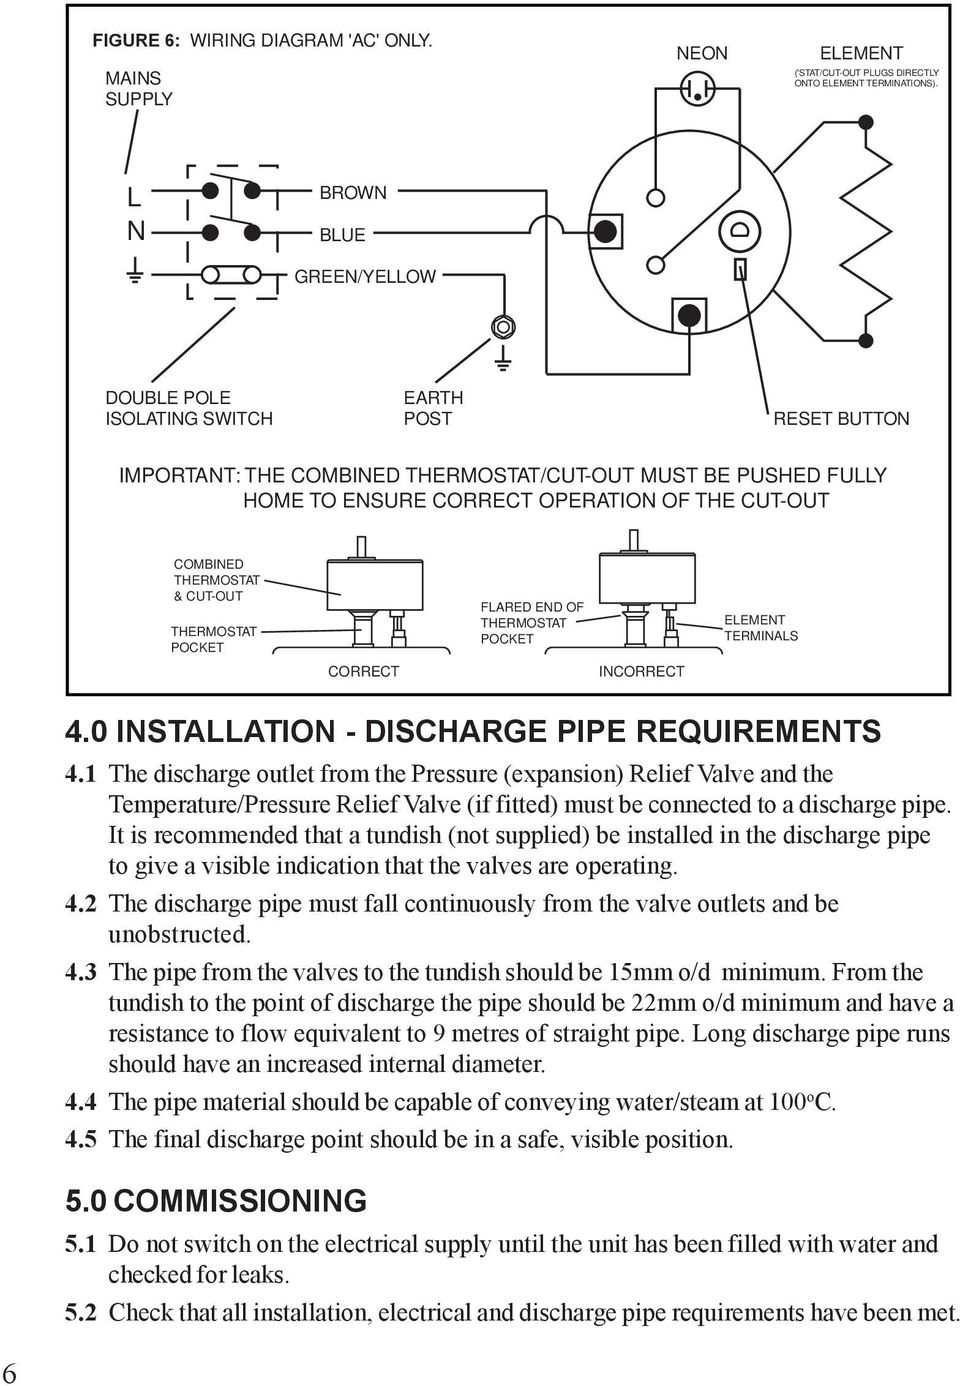 COMBINED THERMOSTAT & CUT-OUT THERMOSTAT POCKET CORRECT FLARED END OF THERMOSTAT POCKET INCORRECT ELEMENT TERMINALS 4.0 INSTALLATION - DISCHARGE PIPE REQUIREMENTS 4.